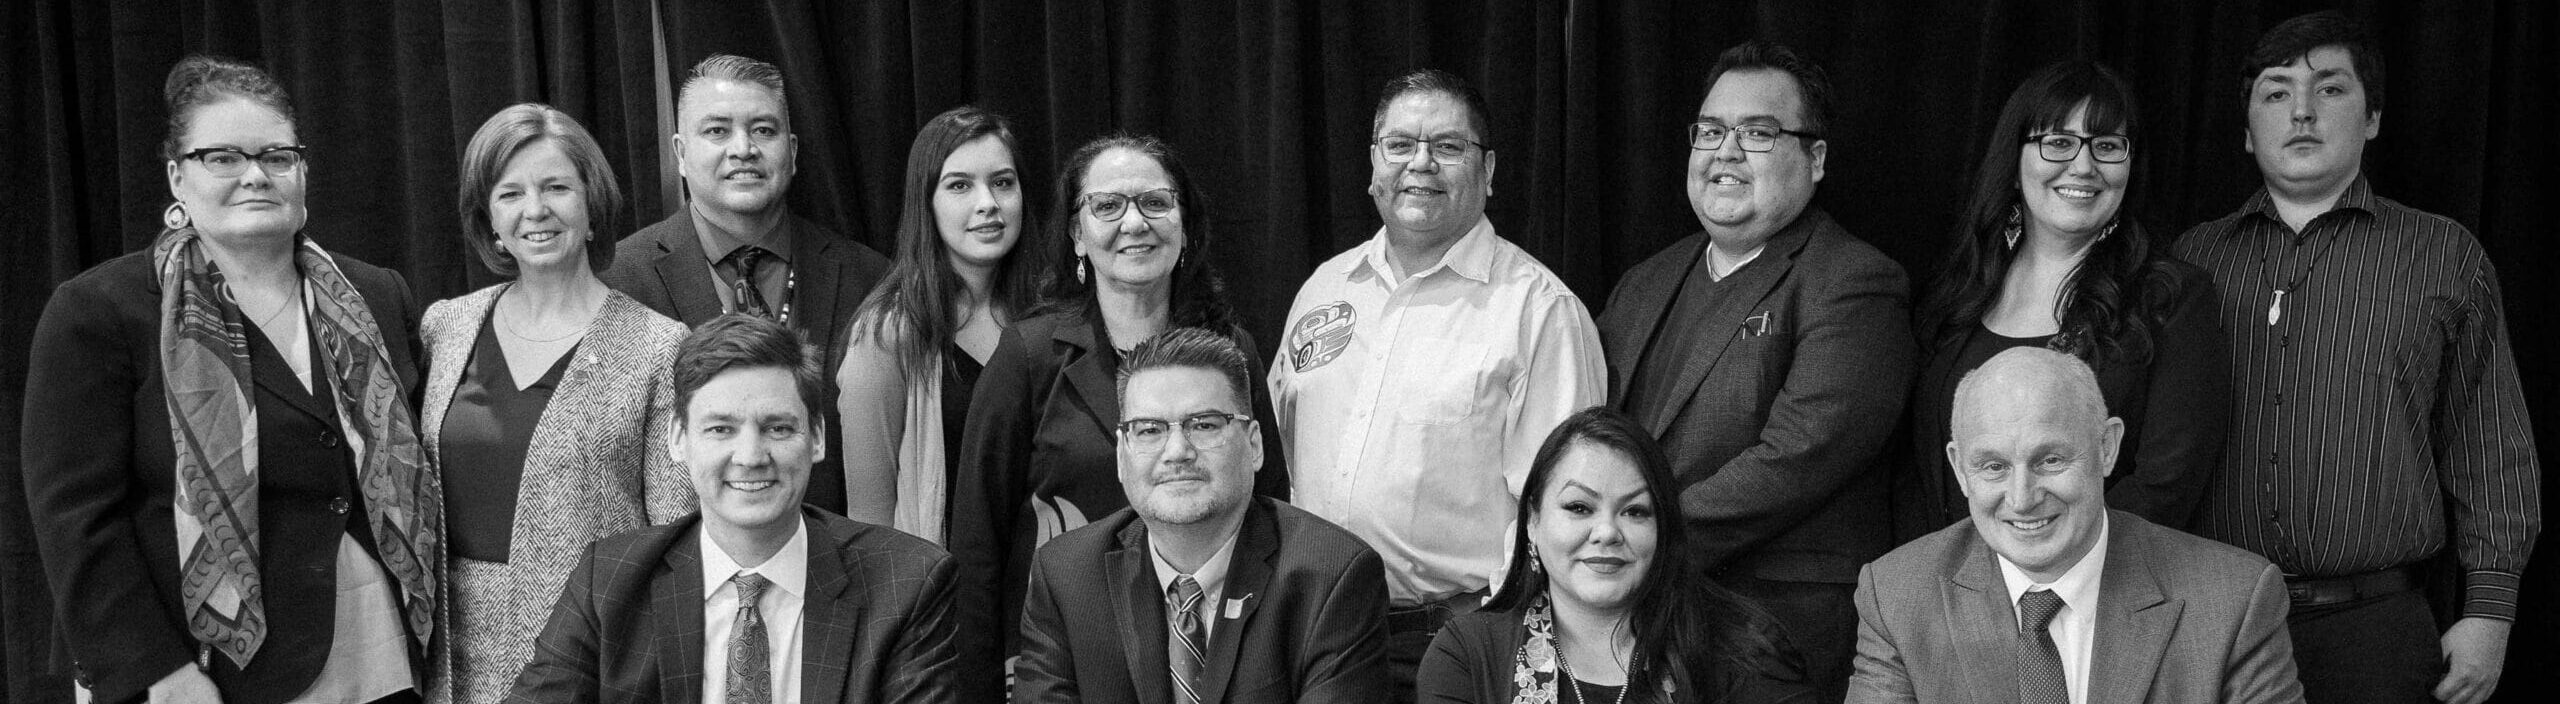 Group photo of the original BC First Nations Justice Council, Provincial Partners, and representatives of the First Nations Leadership Council.